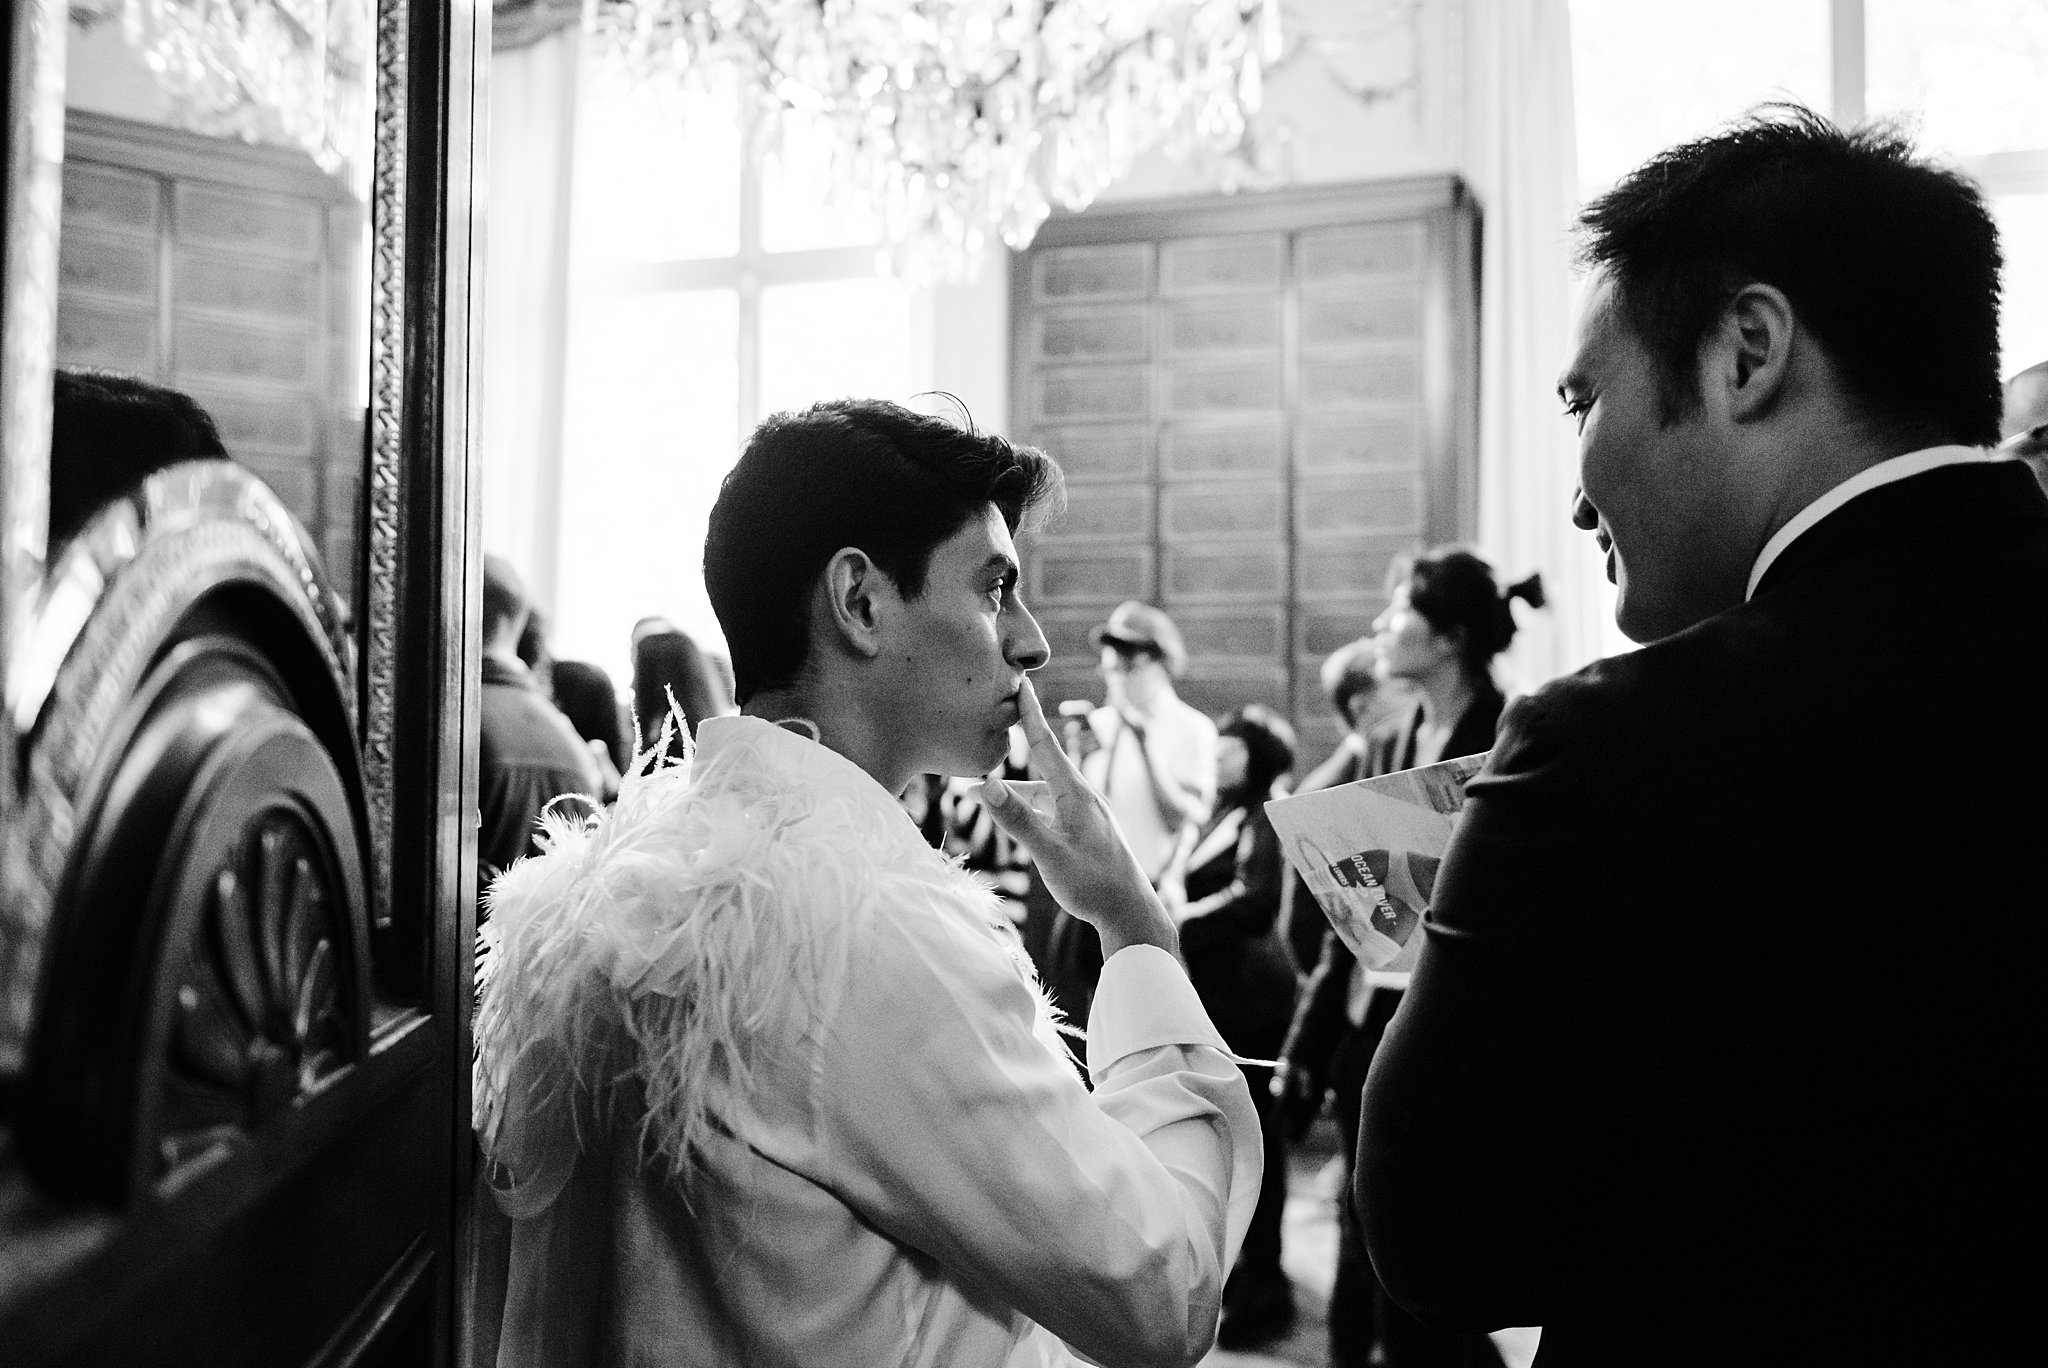 two men look in on the backstage area, flying solo nyc fashion show at paris fashion week